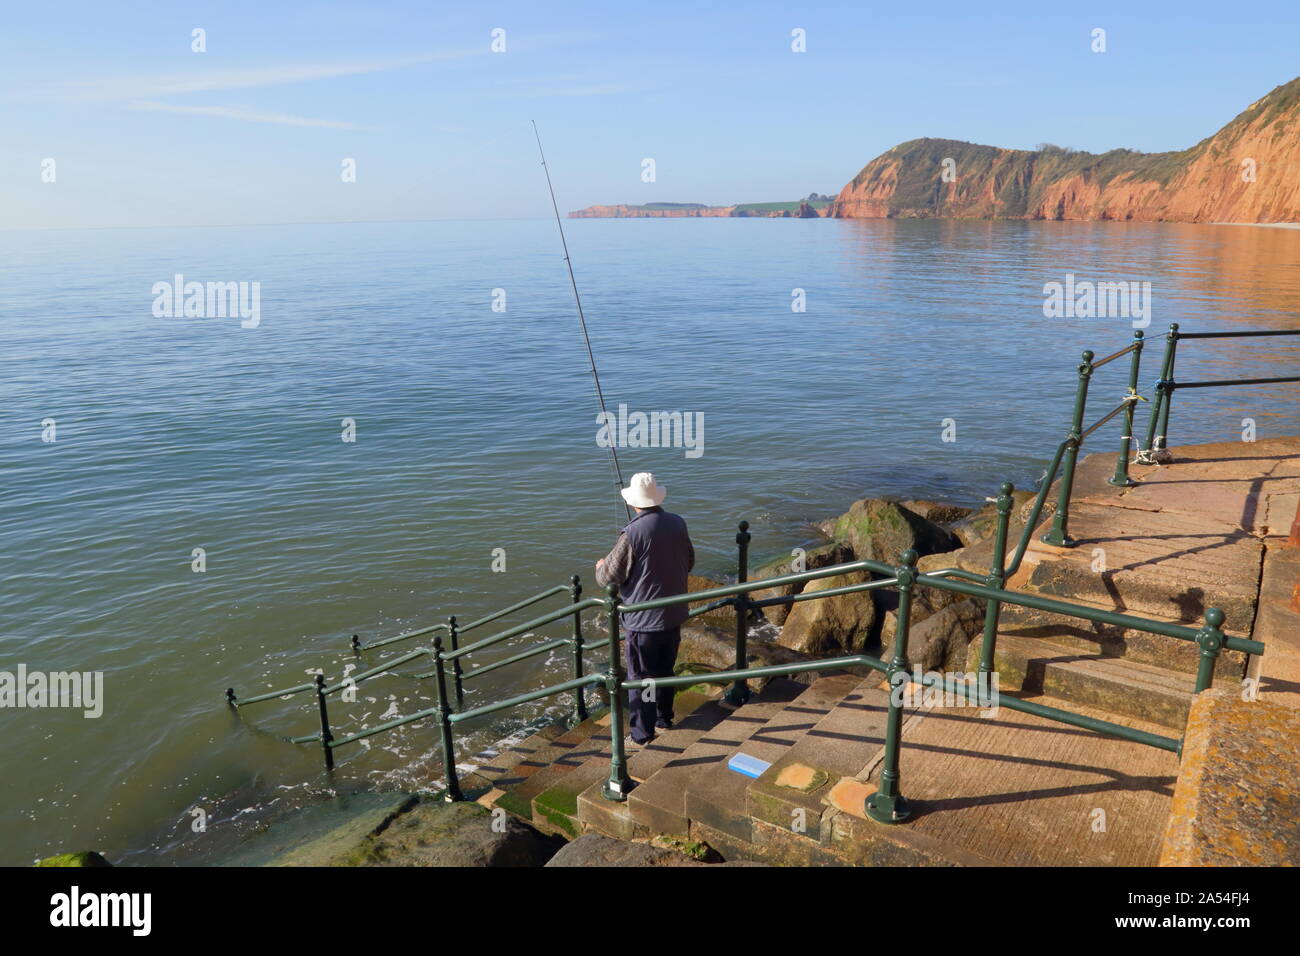 Fly fishing in Sidmouth, Devon on the Jurassic Coast Stock Photo